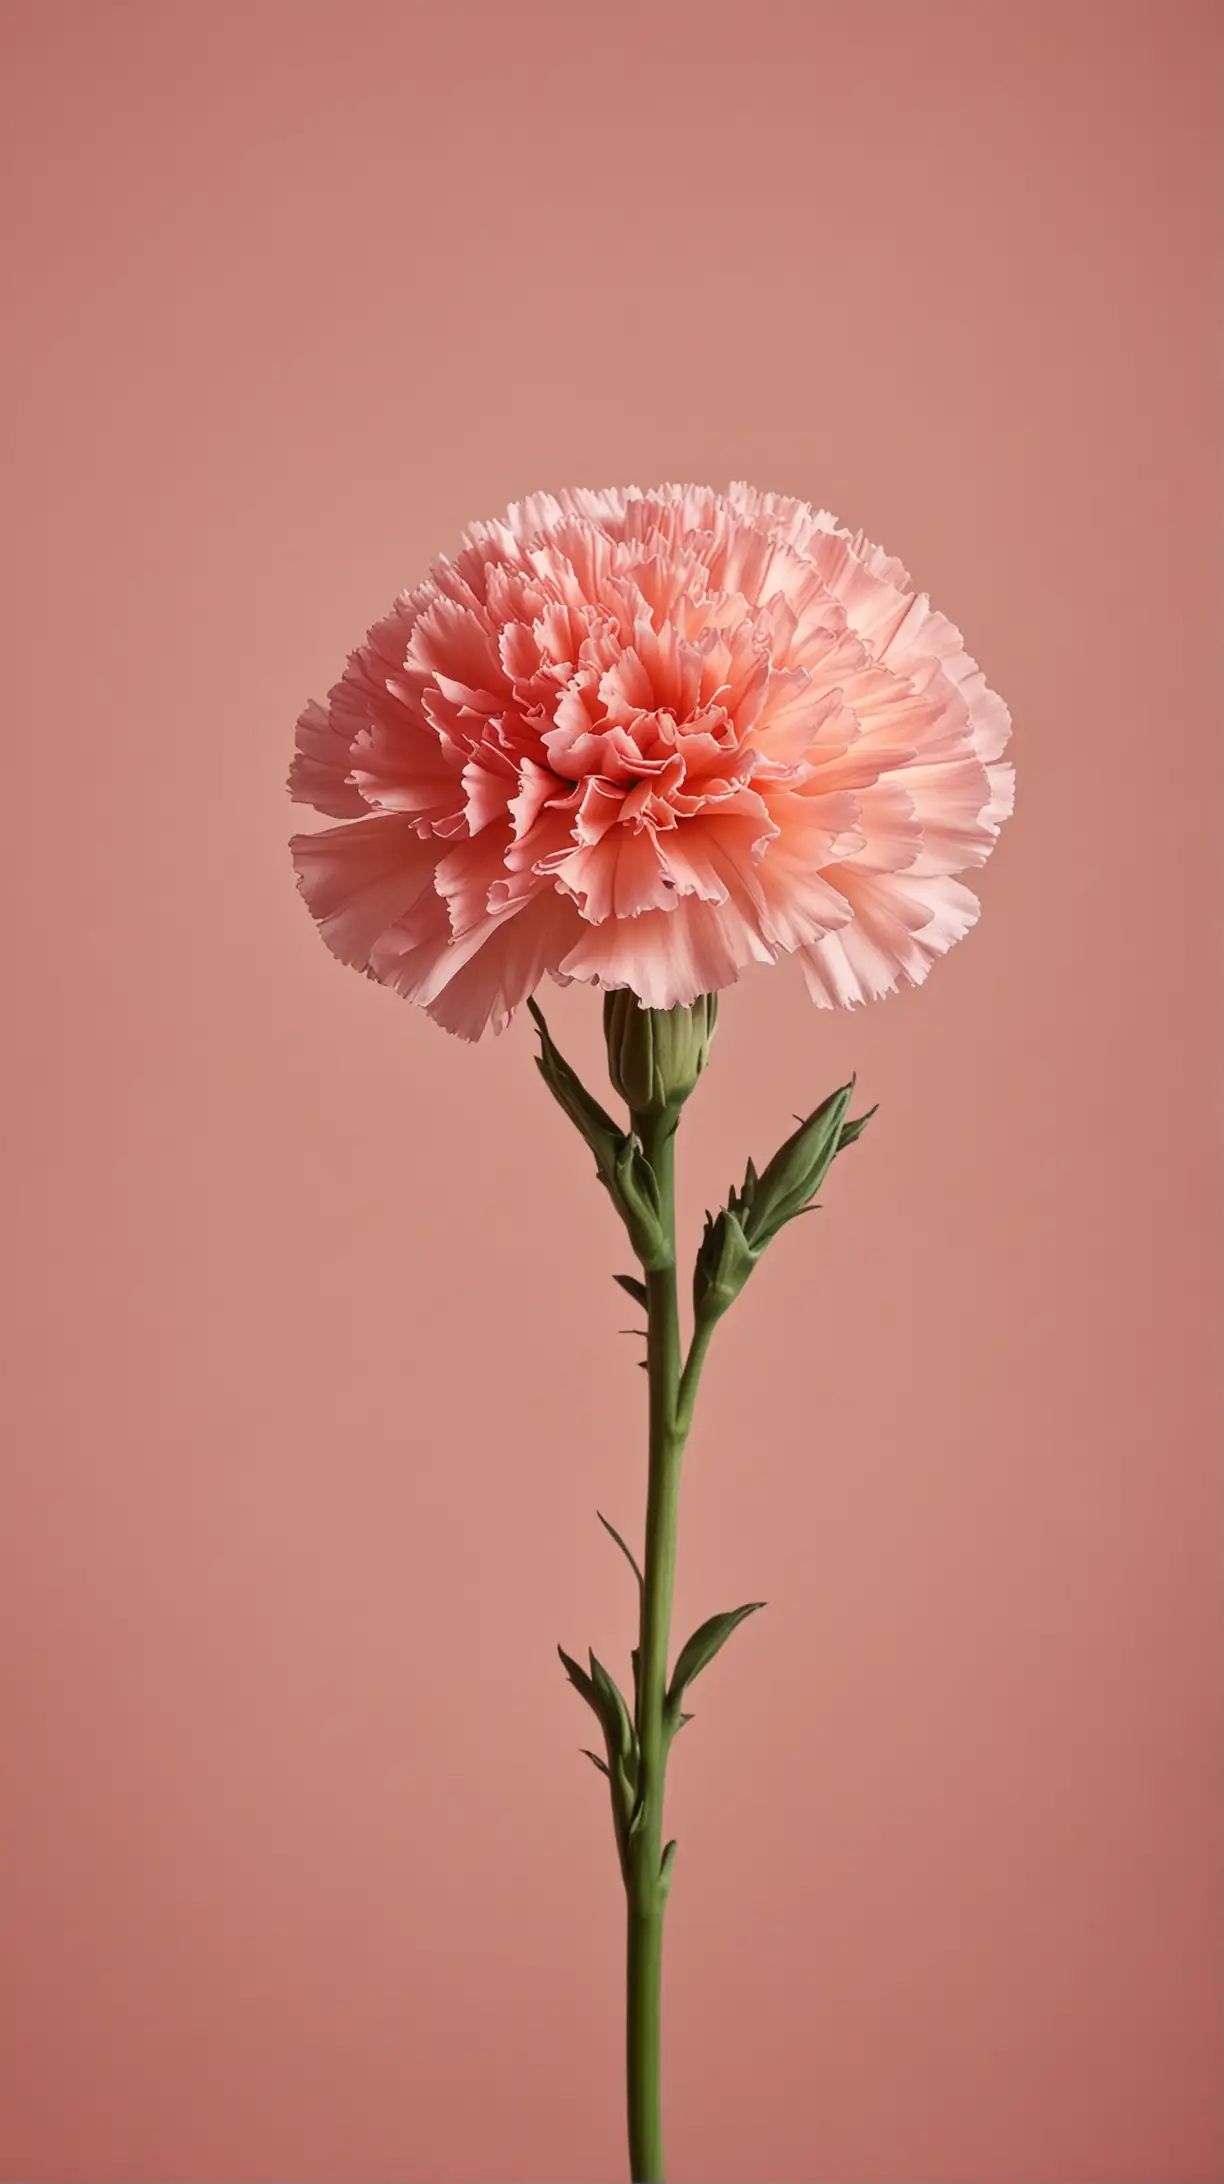 Vibrant Carnation Blooms on a Warm Background Captivating Floral Atmosphere